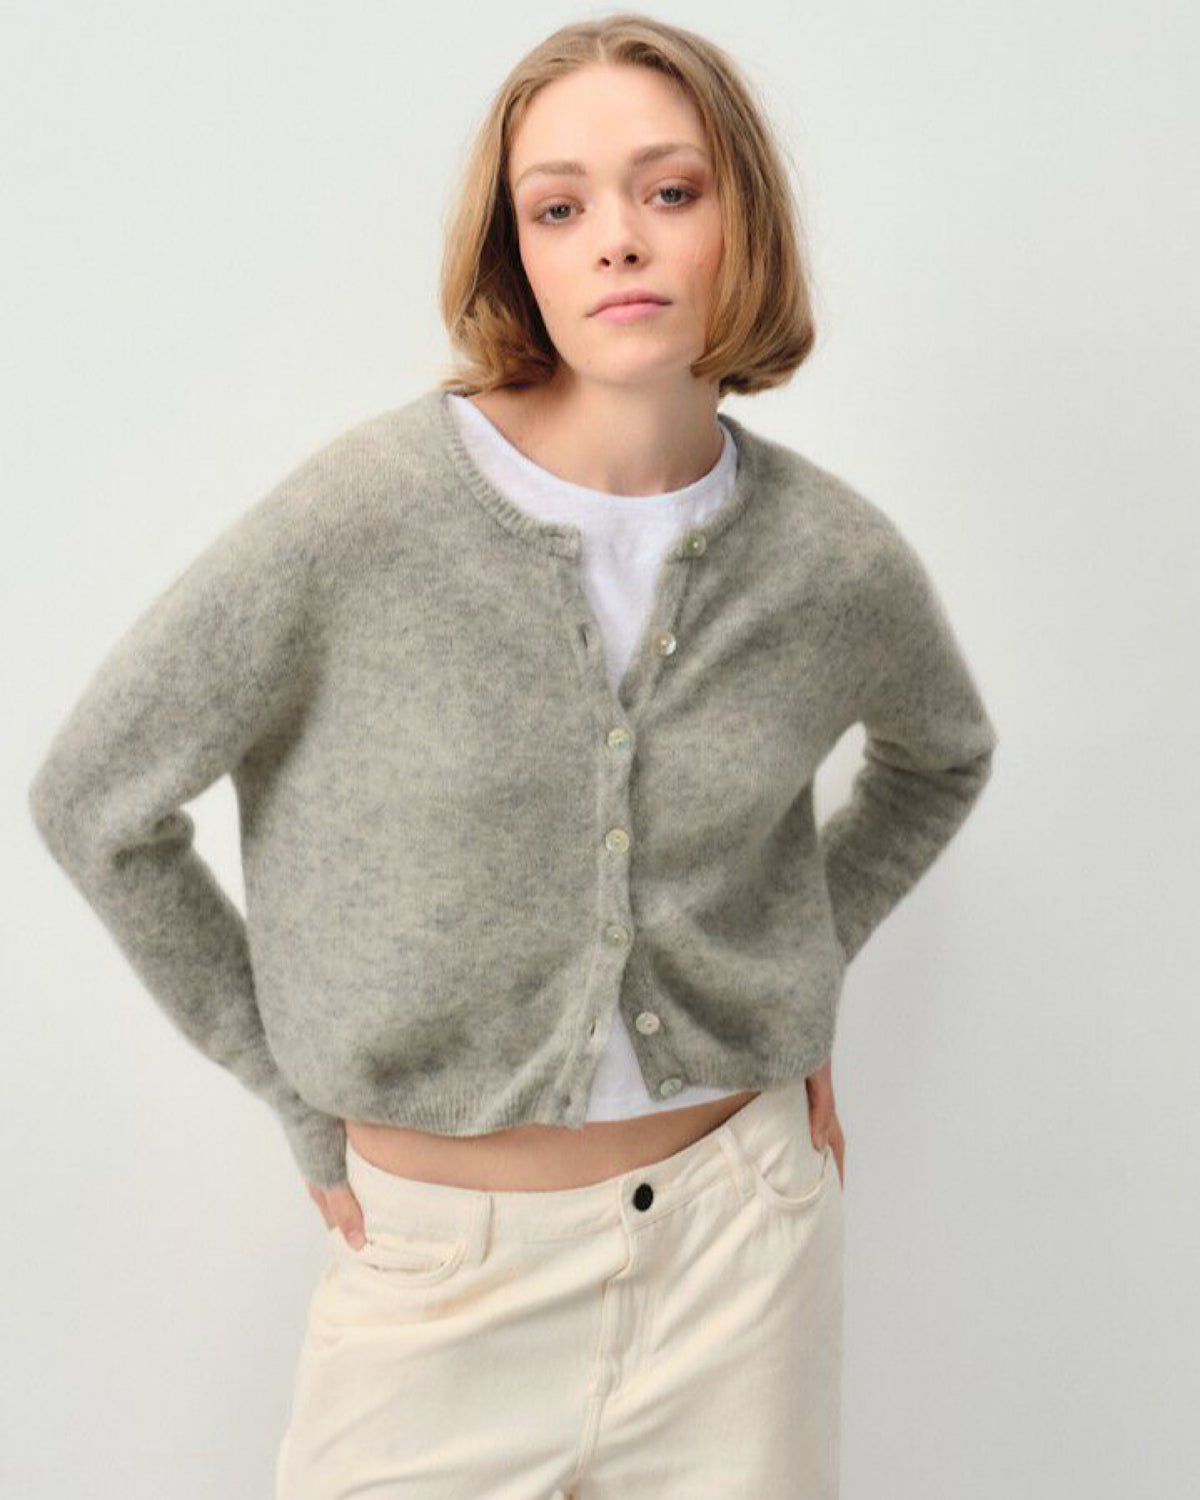 Model wears a grey cardigan and cream jeans